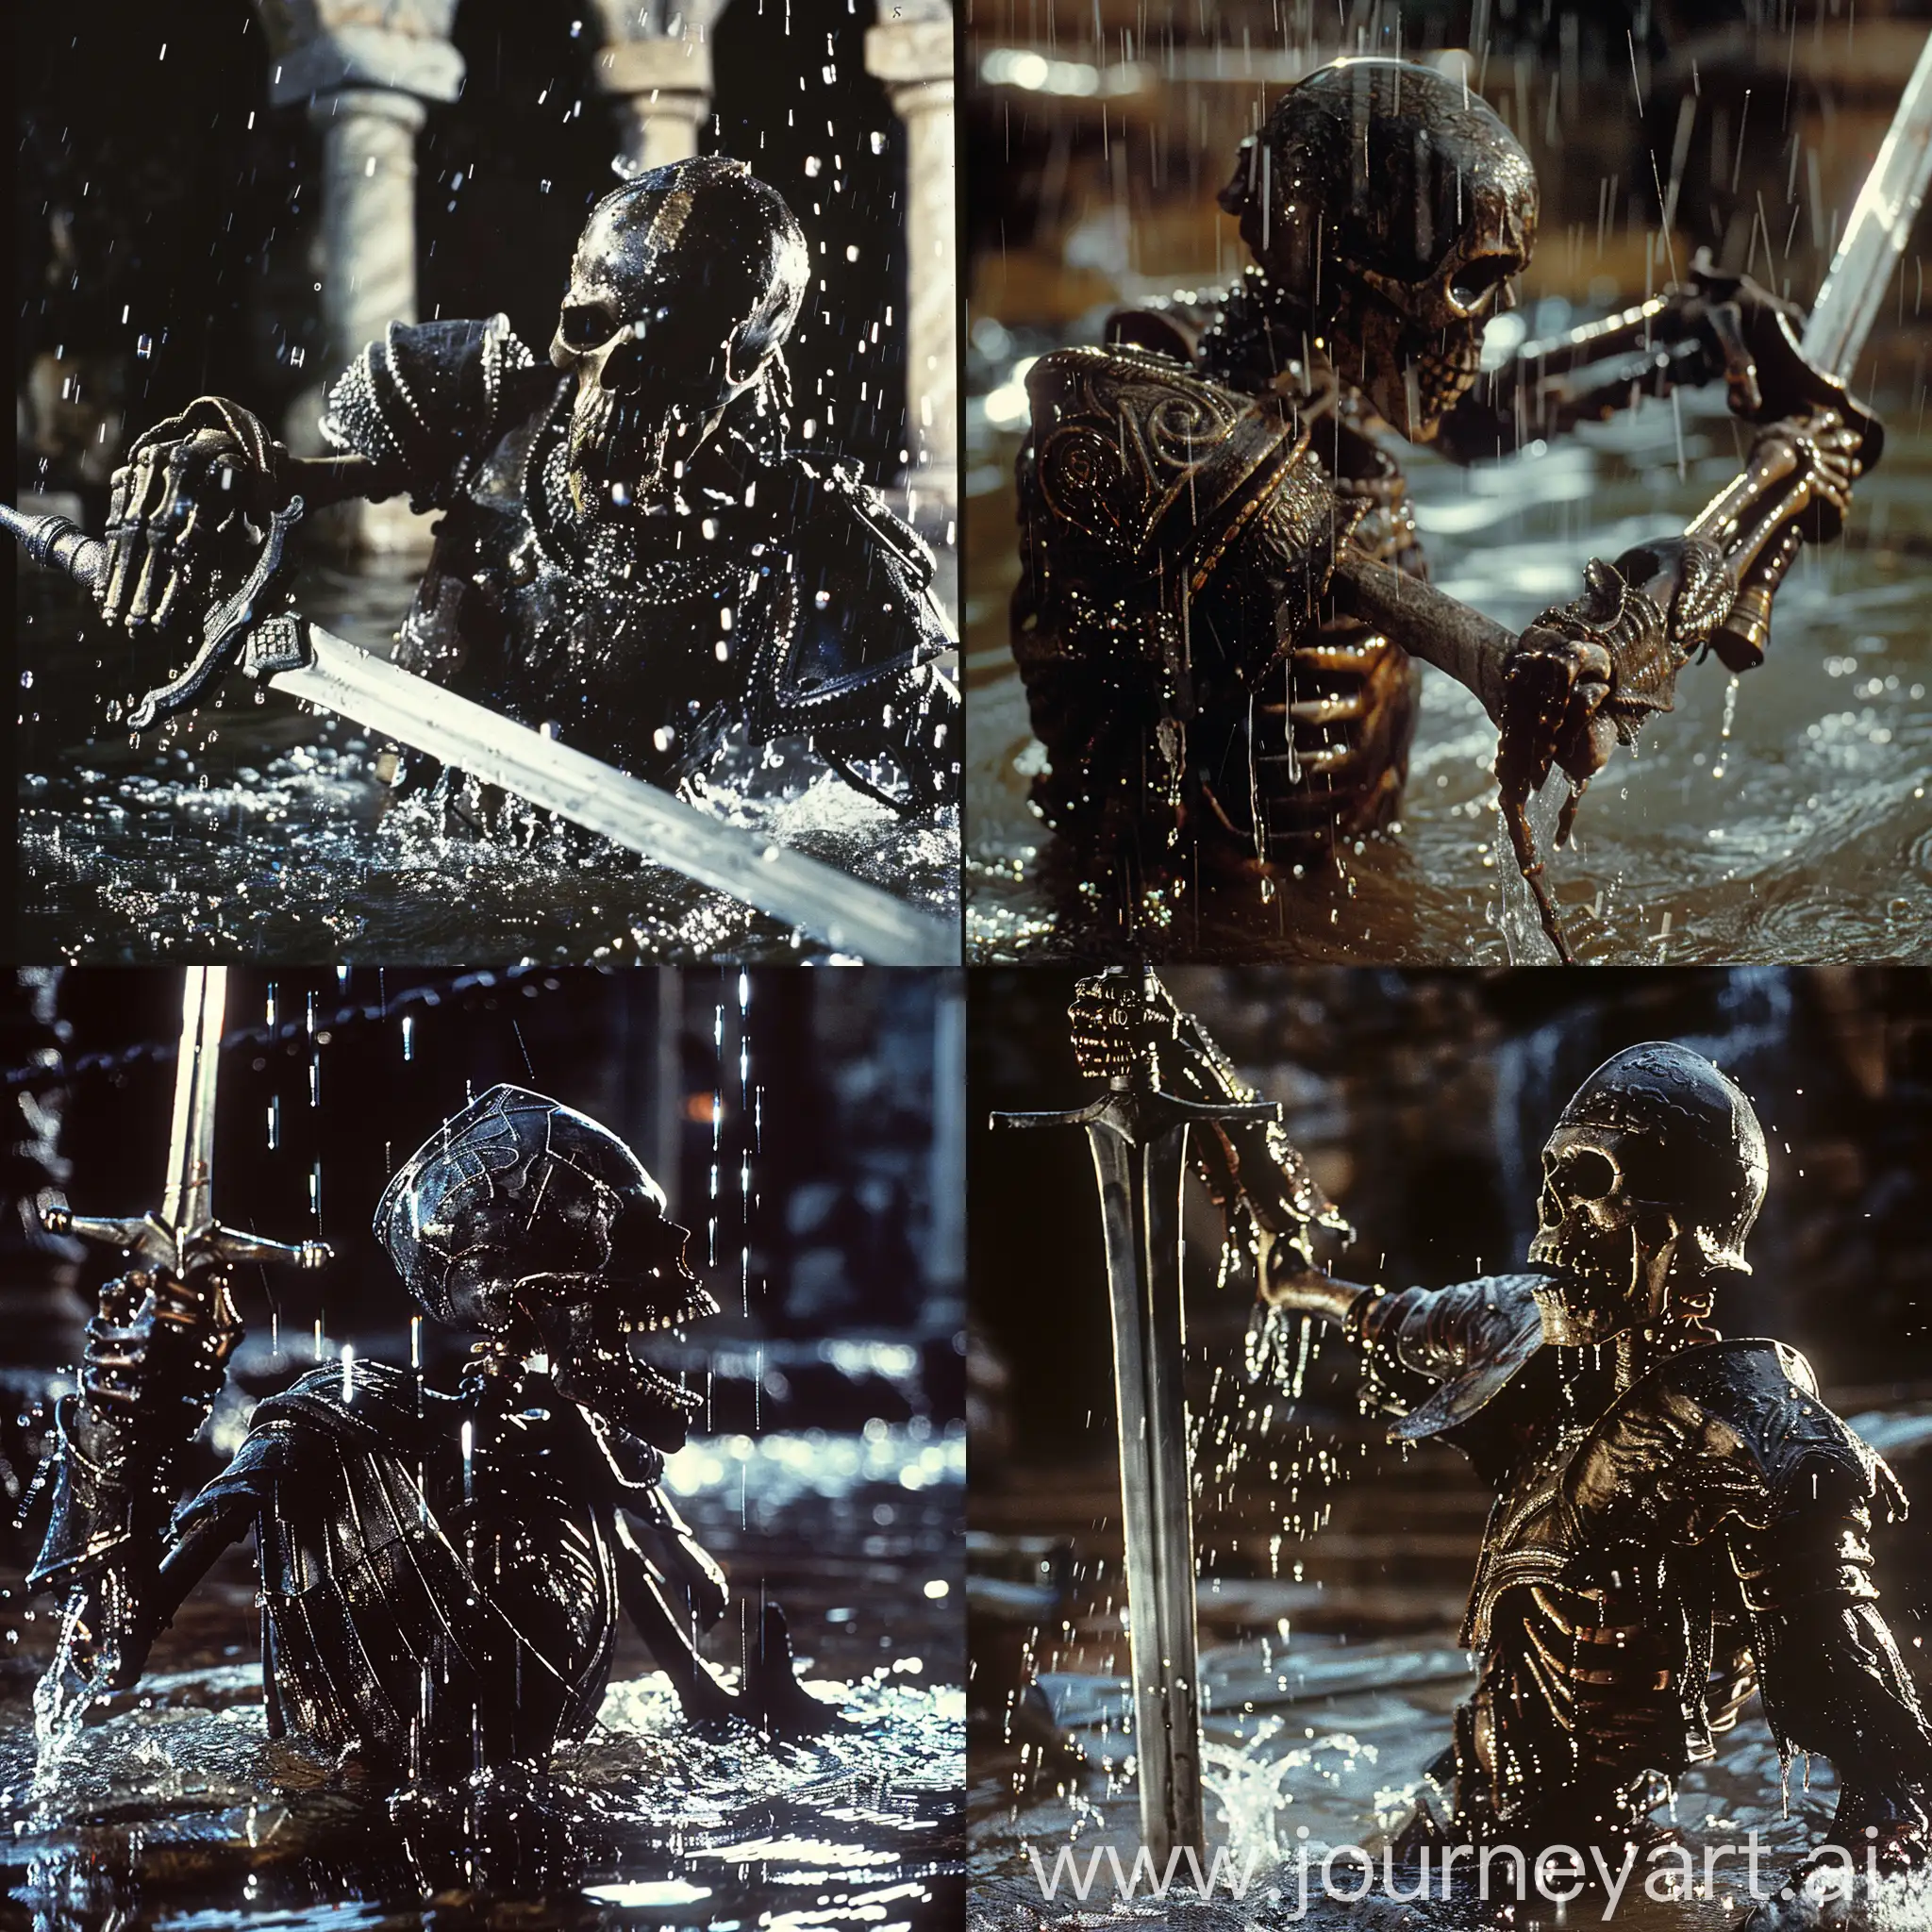 1980s medieval film still from excalibur, closeup shot, a demonic skeleton dressed in armour swielding a sword out of the water, shot on kodachrome, cinestill 800D, heavy rain, wet, raindrops, high contrast, saturated colors, film grain, halation, heavenly glow, hard shadows, cinematic lighting